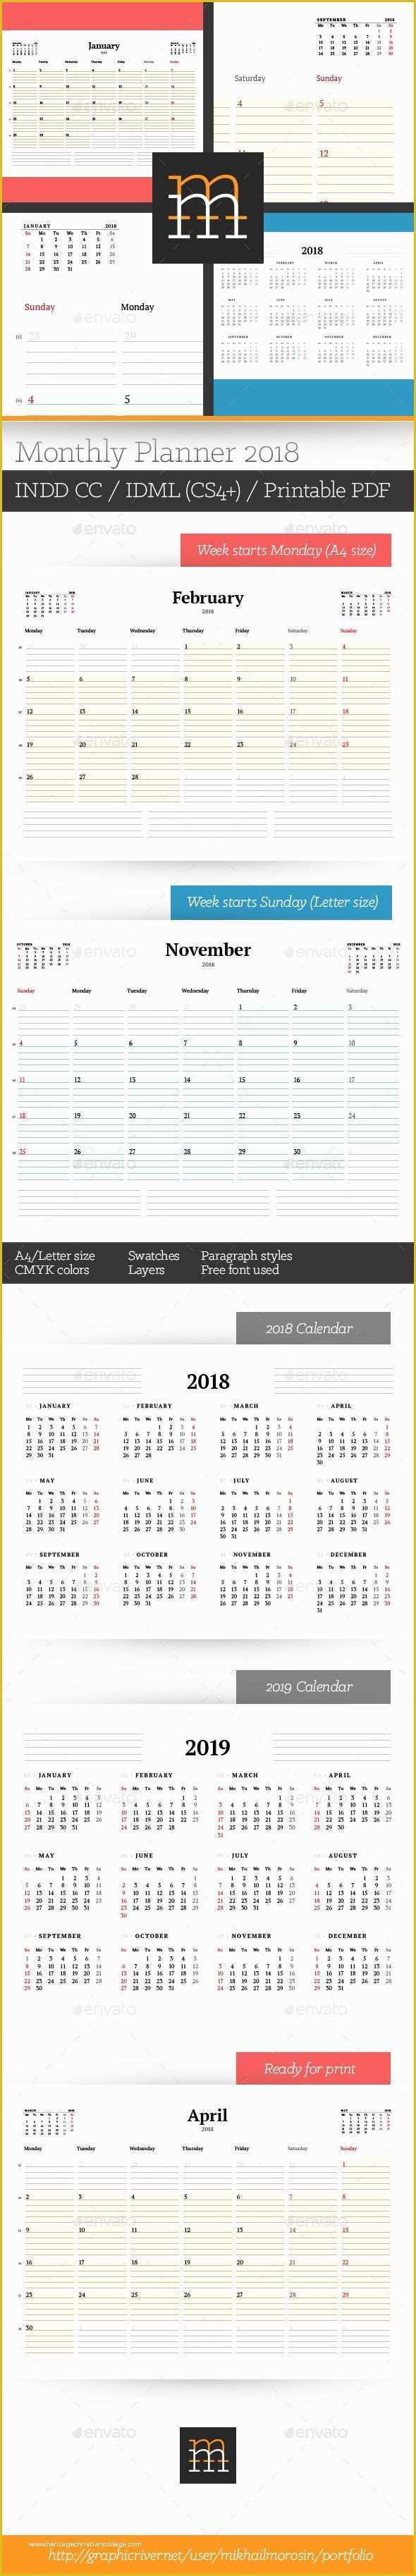 Indesign Planner Template Free Of 25 Best Ideas About Monthly Planner Template On Pinterest